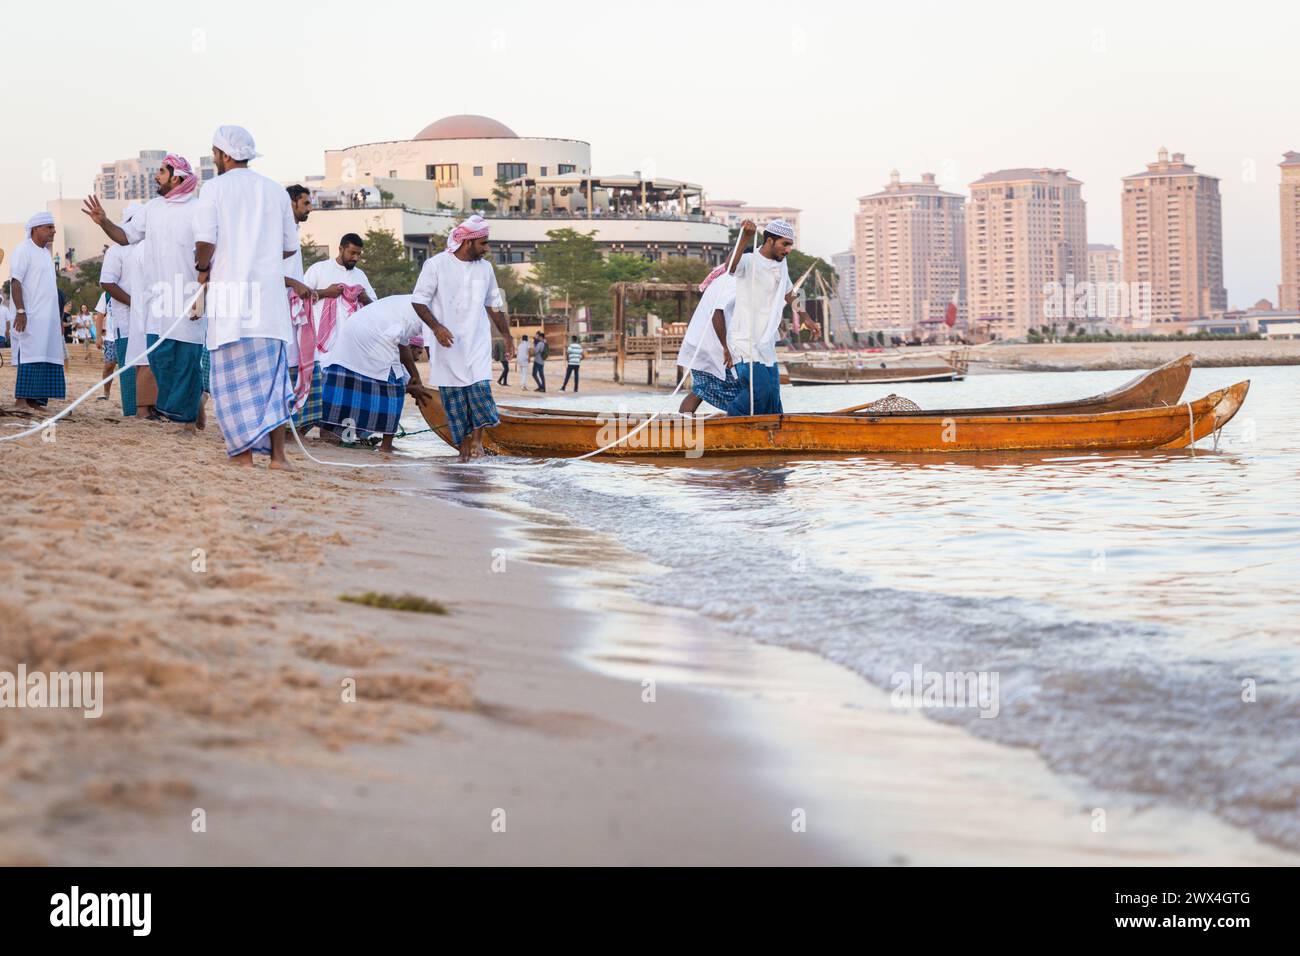 Arabic fishermen on an ancient wooden boat go fishing at sunset. Preservation of national traditions, ancient crafts, historical lifestyle Stock Photo